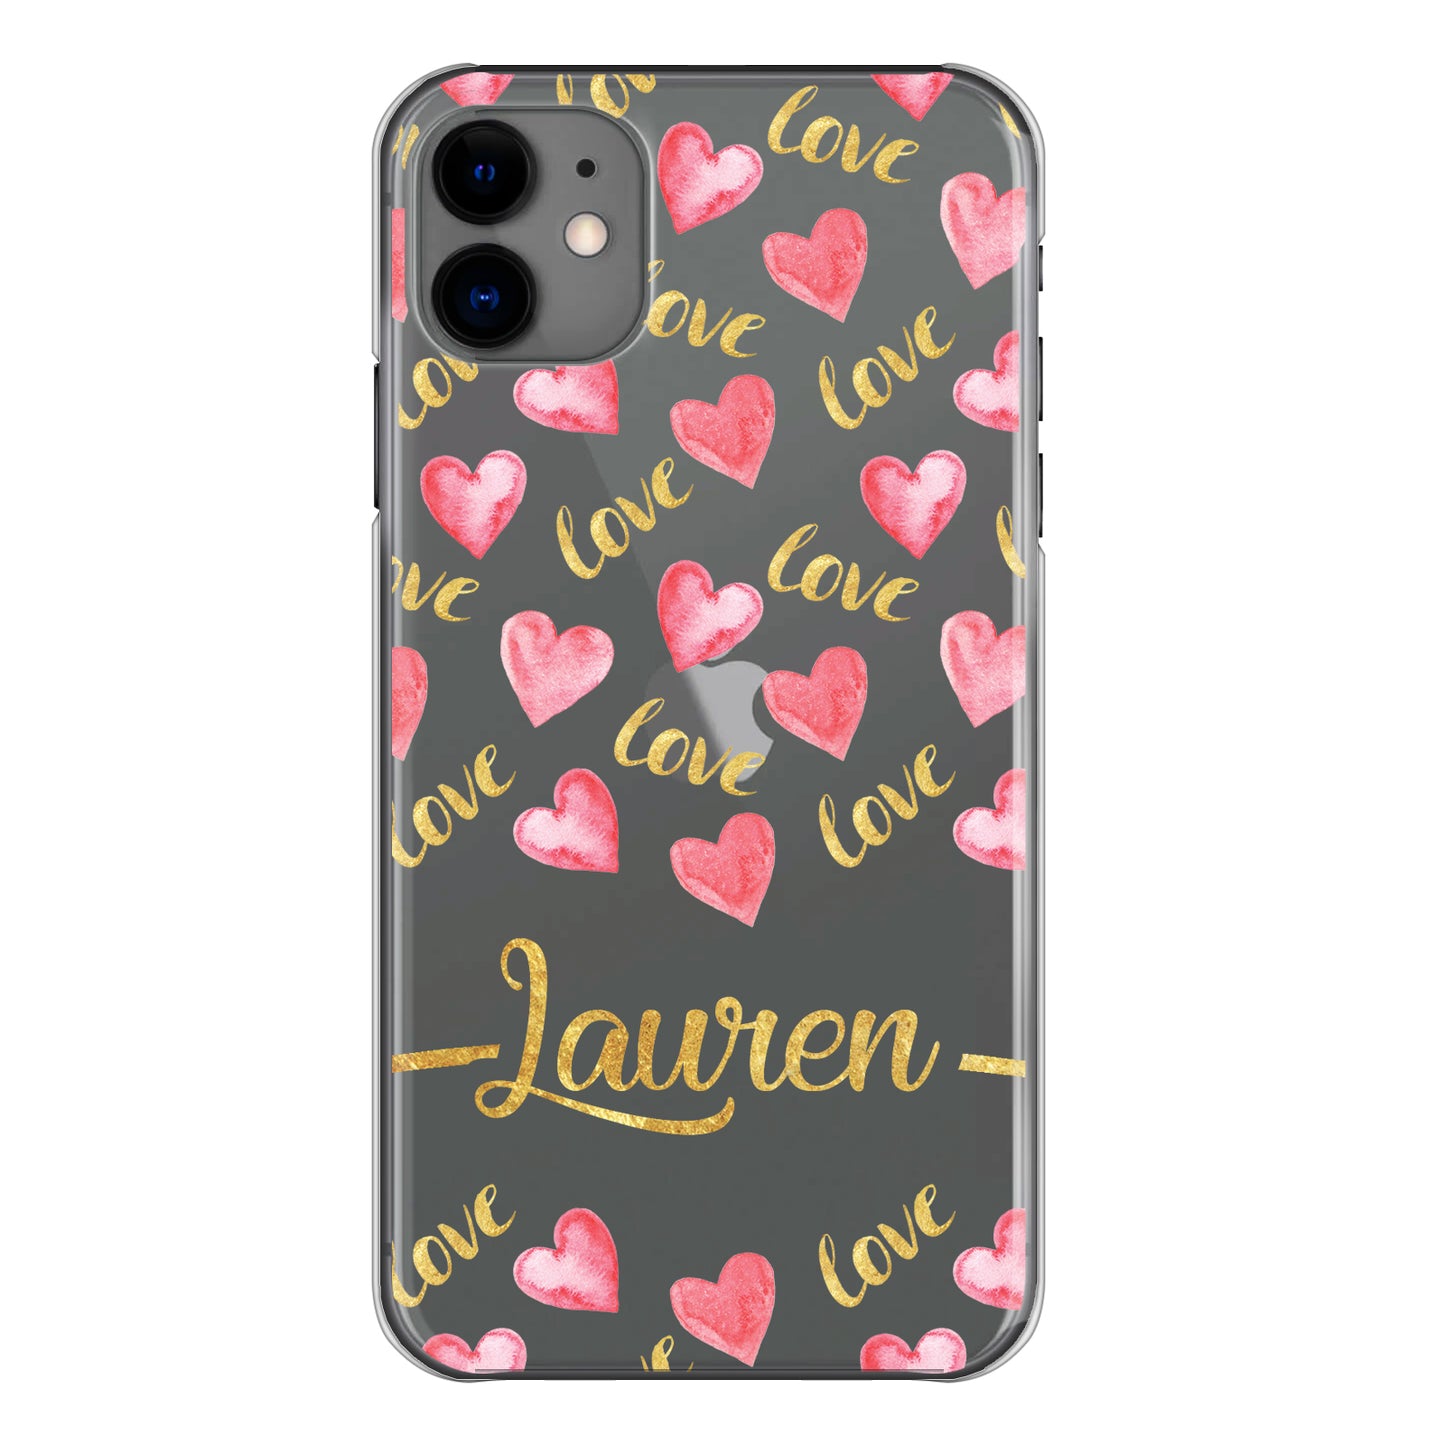 Personalised Xiaomi Phone Hard Case with Love Hearts and Cute Gold Text